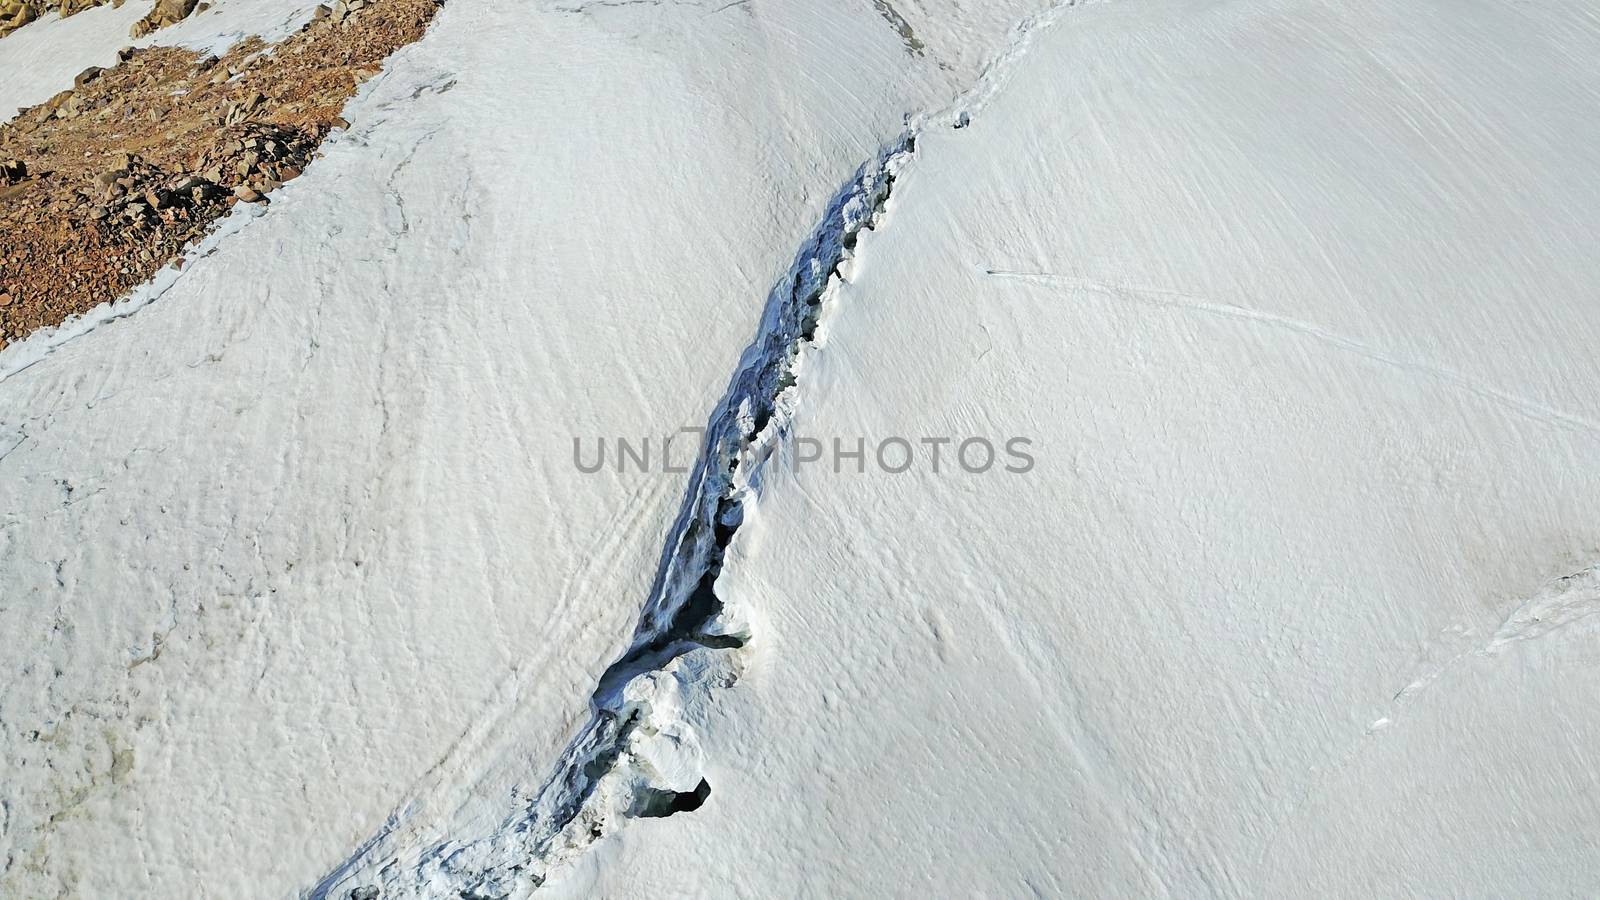 Huge cracks in the glacier at the top of the peak. A fault and a danger of avalanche. You can fall through the ice. Top view from a drone. Mountainous terrain, lots of snow and cliffs. Climbers.